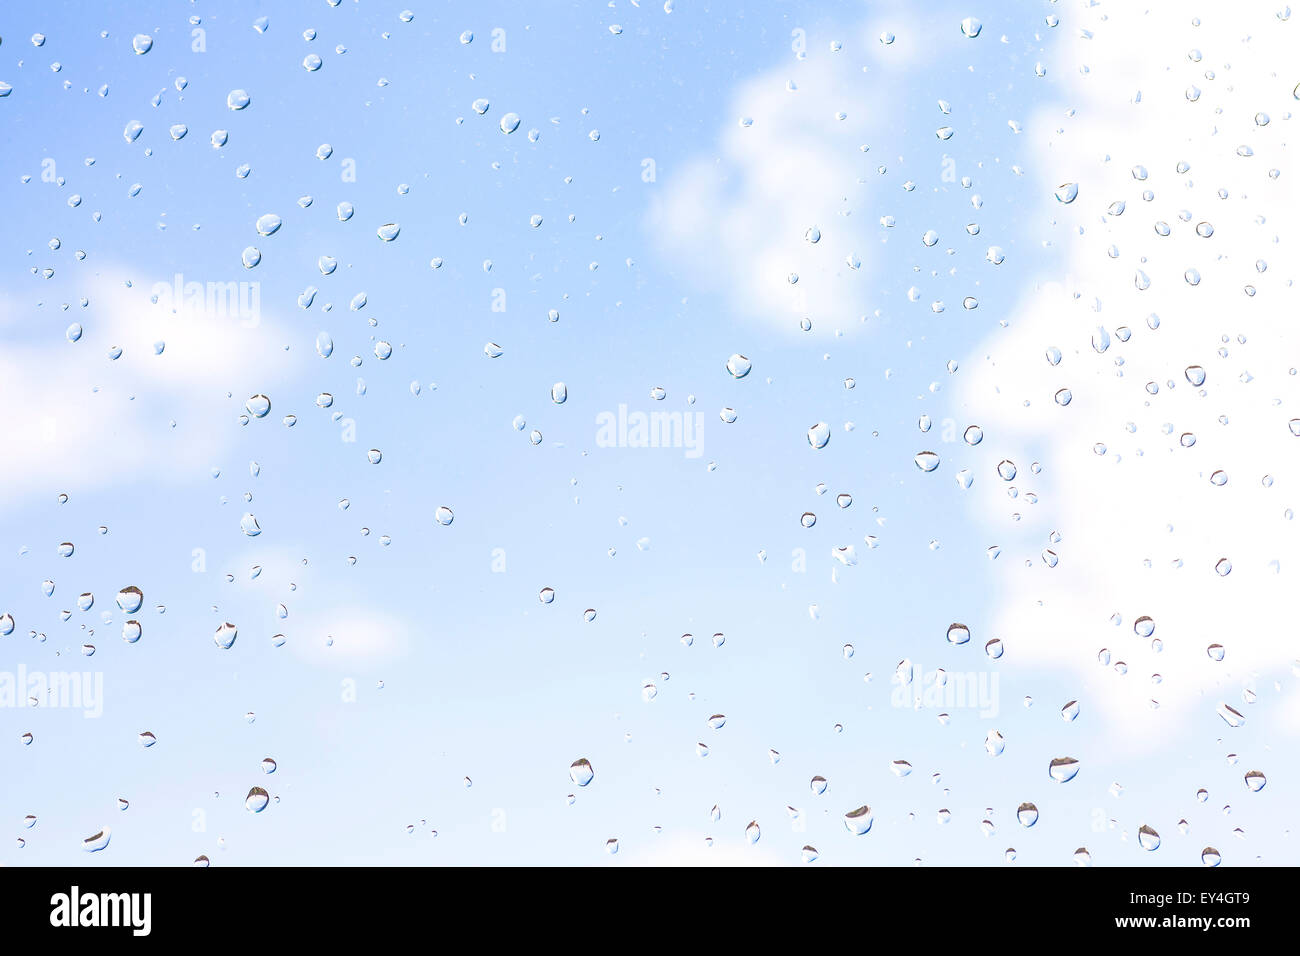 Drops of rain on glass, nature background. Stock Photo